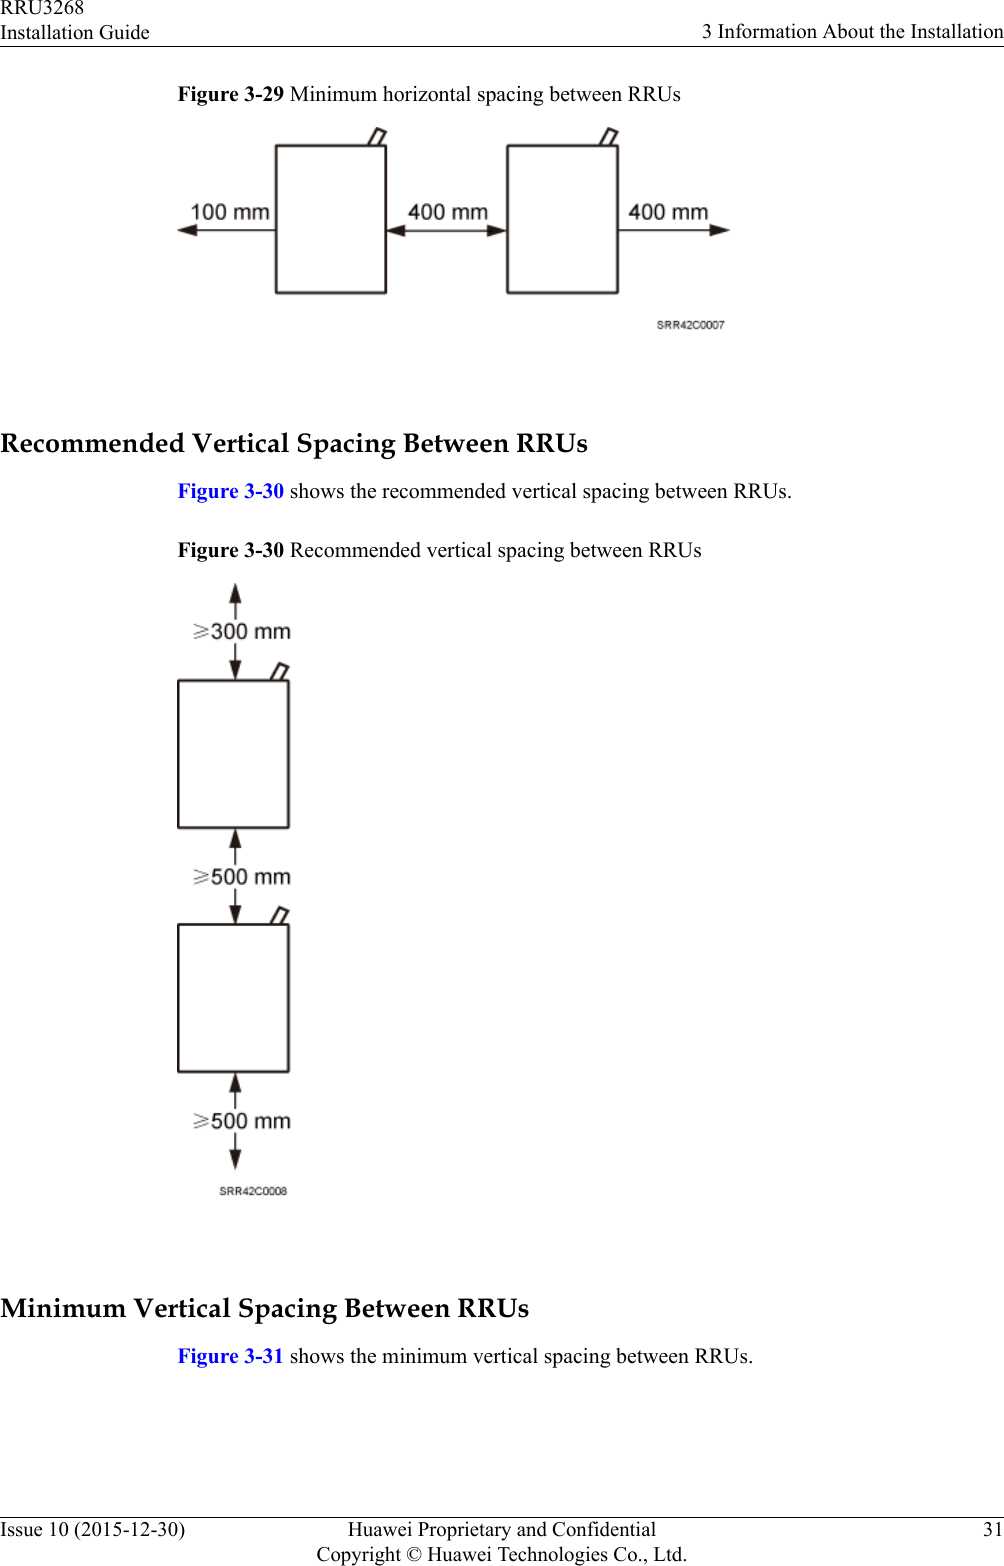 Figure 3-29 Minimum horizontal spacing between RRUs Recommended Vertical Spacing Between RRUsFigure 3-30 shows the recommended vertical spacing between RRUs.Figure 3-30 Recommended vertical spacing between RRUs Minimum Vertical Spacing Between RRUsFigure 3-31 shows the minimum vertical spacing between RRUs.RRU3268Installation Guide 3 Information About the InstallationIssue 10 (2015-12-30) Huawei Proprietary and ConfidentialCopyright © Huawei Technologies Co., Ltd.31